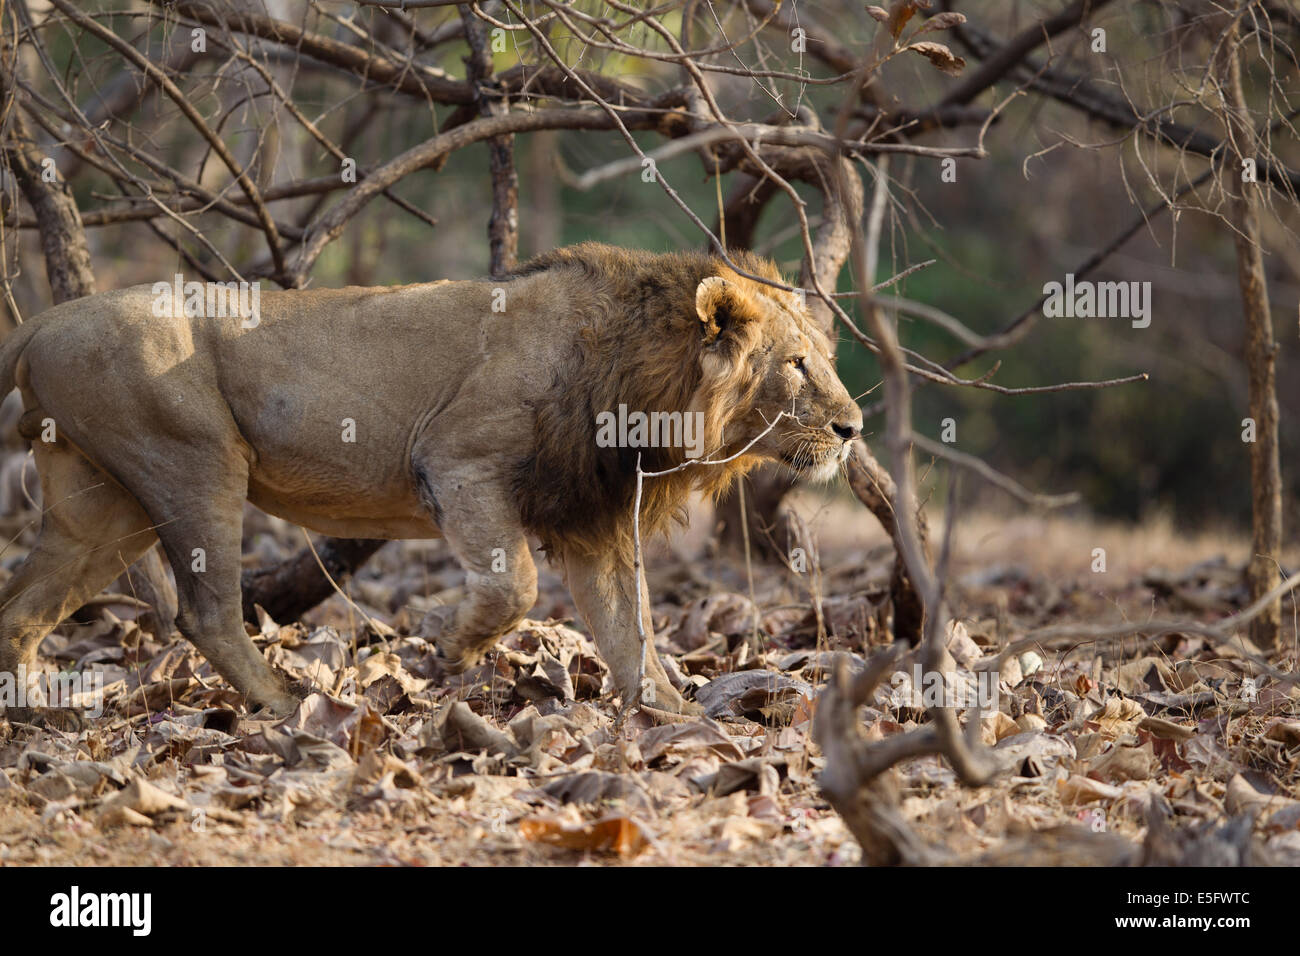 Asiatic Lions (Panthera leo persica) at Gir forest, Gujarat, India. Stock Photo